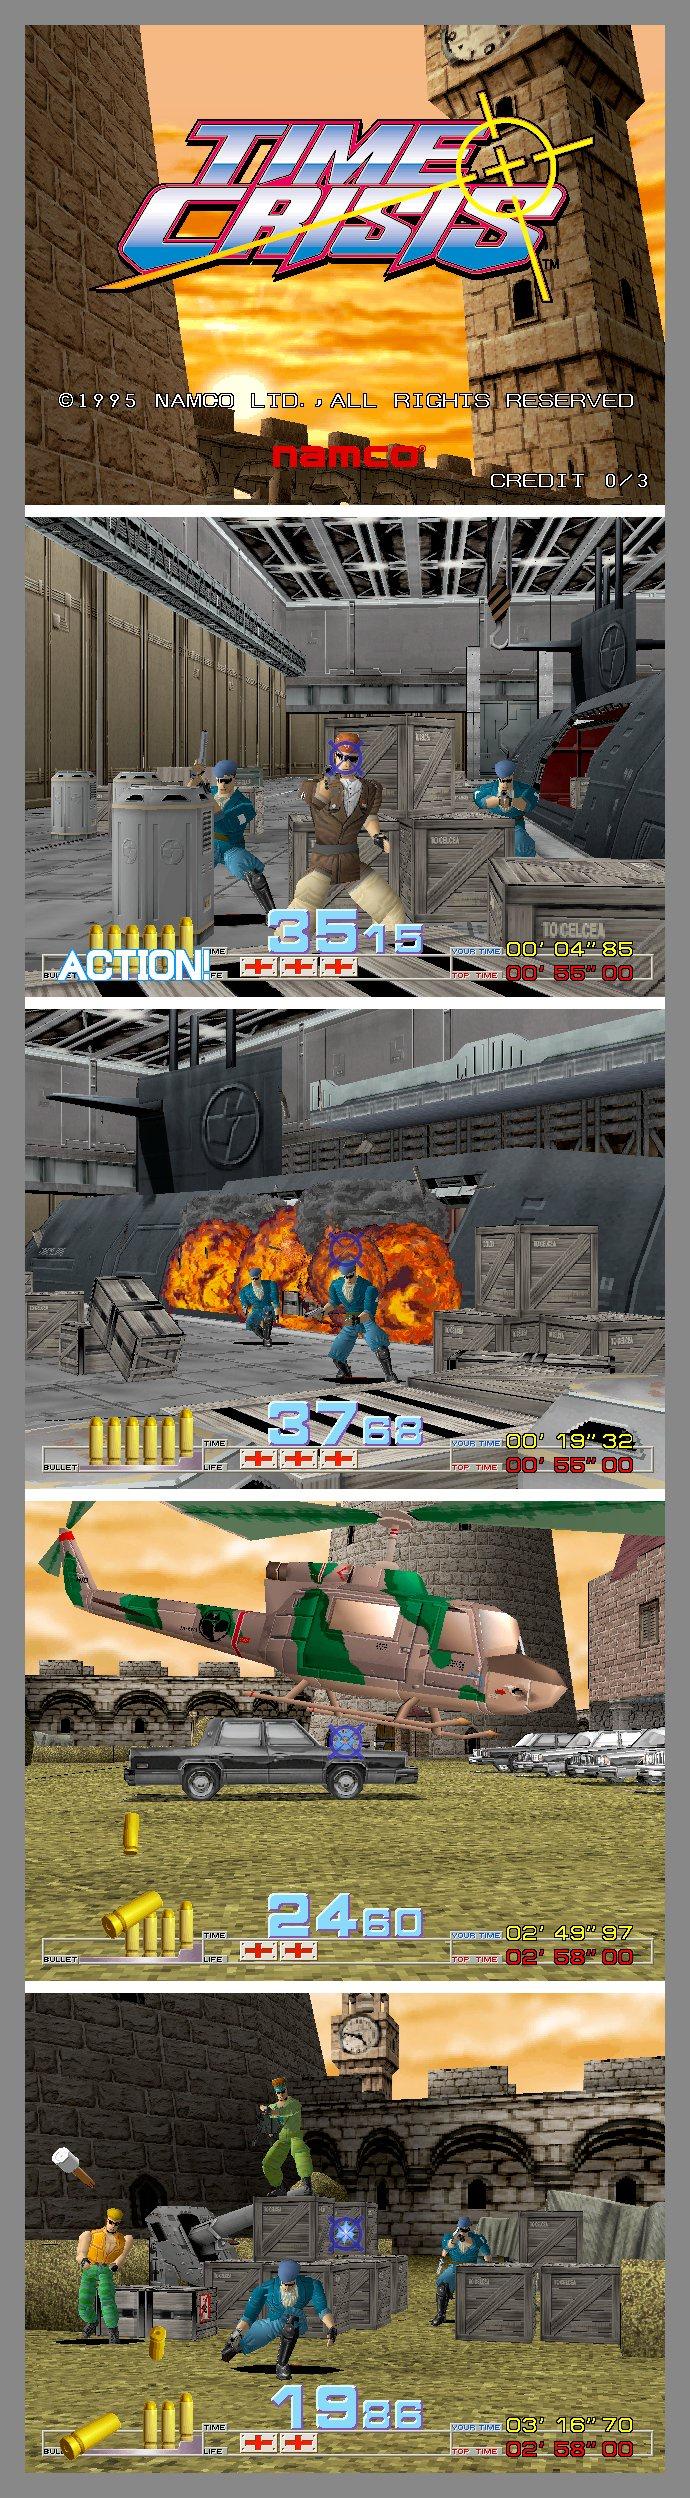 Image For Post | **Development**
A port of the game for the [Sony] PlayStation was released in 1997, as part of a bundle coinciding with the launch of the Guncon light gun controller, and featured a add-on pack of additional stages that are set after the main story.

Though both the arcade and PlayStation versions were developed internally at Namco, none of the arcade development team had any direct involvement with the PlayStation version. Since the PlayStation's CPU speed is much lower than that of the System 22 arcade hardware, the team reduced demands on the PlayStation CPU by cutting the game's frame rate in half, reducing the number of polygons used, emulating the real-time lighting by coloring the polygons one-by-one, and delaying the appearance of enemies so that only a certain number of enemies could appear on-screen at any time.

The development team took photos of hotels and factories in the Tokyo area as reference for the PlayStation mode's hotel design. To make the large areas in the hotel work on the hardware, the team left the portions of these areas not visible to the player unrendered. Three planned sequences - an outdoor restaurant, a missile room explosion, and a boat race - were left out because the team eventually realized that creating them was not practical, at least not within the time they had to complete the PlayStation version. New music was recorded for the Special Mission mode by Tatsuro Tani and Tomoko Tat2, using a "synthesized orchestra" of 50 individually synthesized instruments.

**Legacy**
The title was also released exclusively in Japan for the PS2 in 2002, under the title of Gunvari Collection, which includes Gun Bullet, Gunbarl, Gunbalina (these games are known as the Point Blank series outside of Japan). There are two versions of the collection available: a standalone version, and a boxset which includes the collection and a Guncon 2 lightgun.

**Sequels**
The game proved a commercial success and spawned a sequel, Time Crisis II, in 1998, and a spin-off title, Time Crisis: Project Titan, in 2001.

**Alternate Titles**
"化解危机" -- Chinese spelling (simplified)
"タイムクライシス" -- Japanese spelling